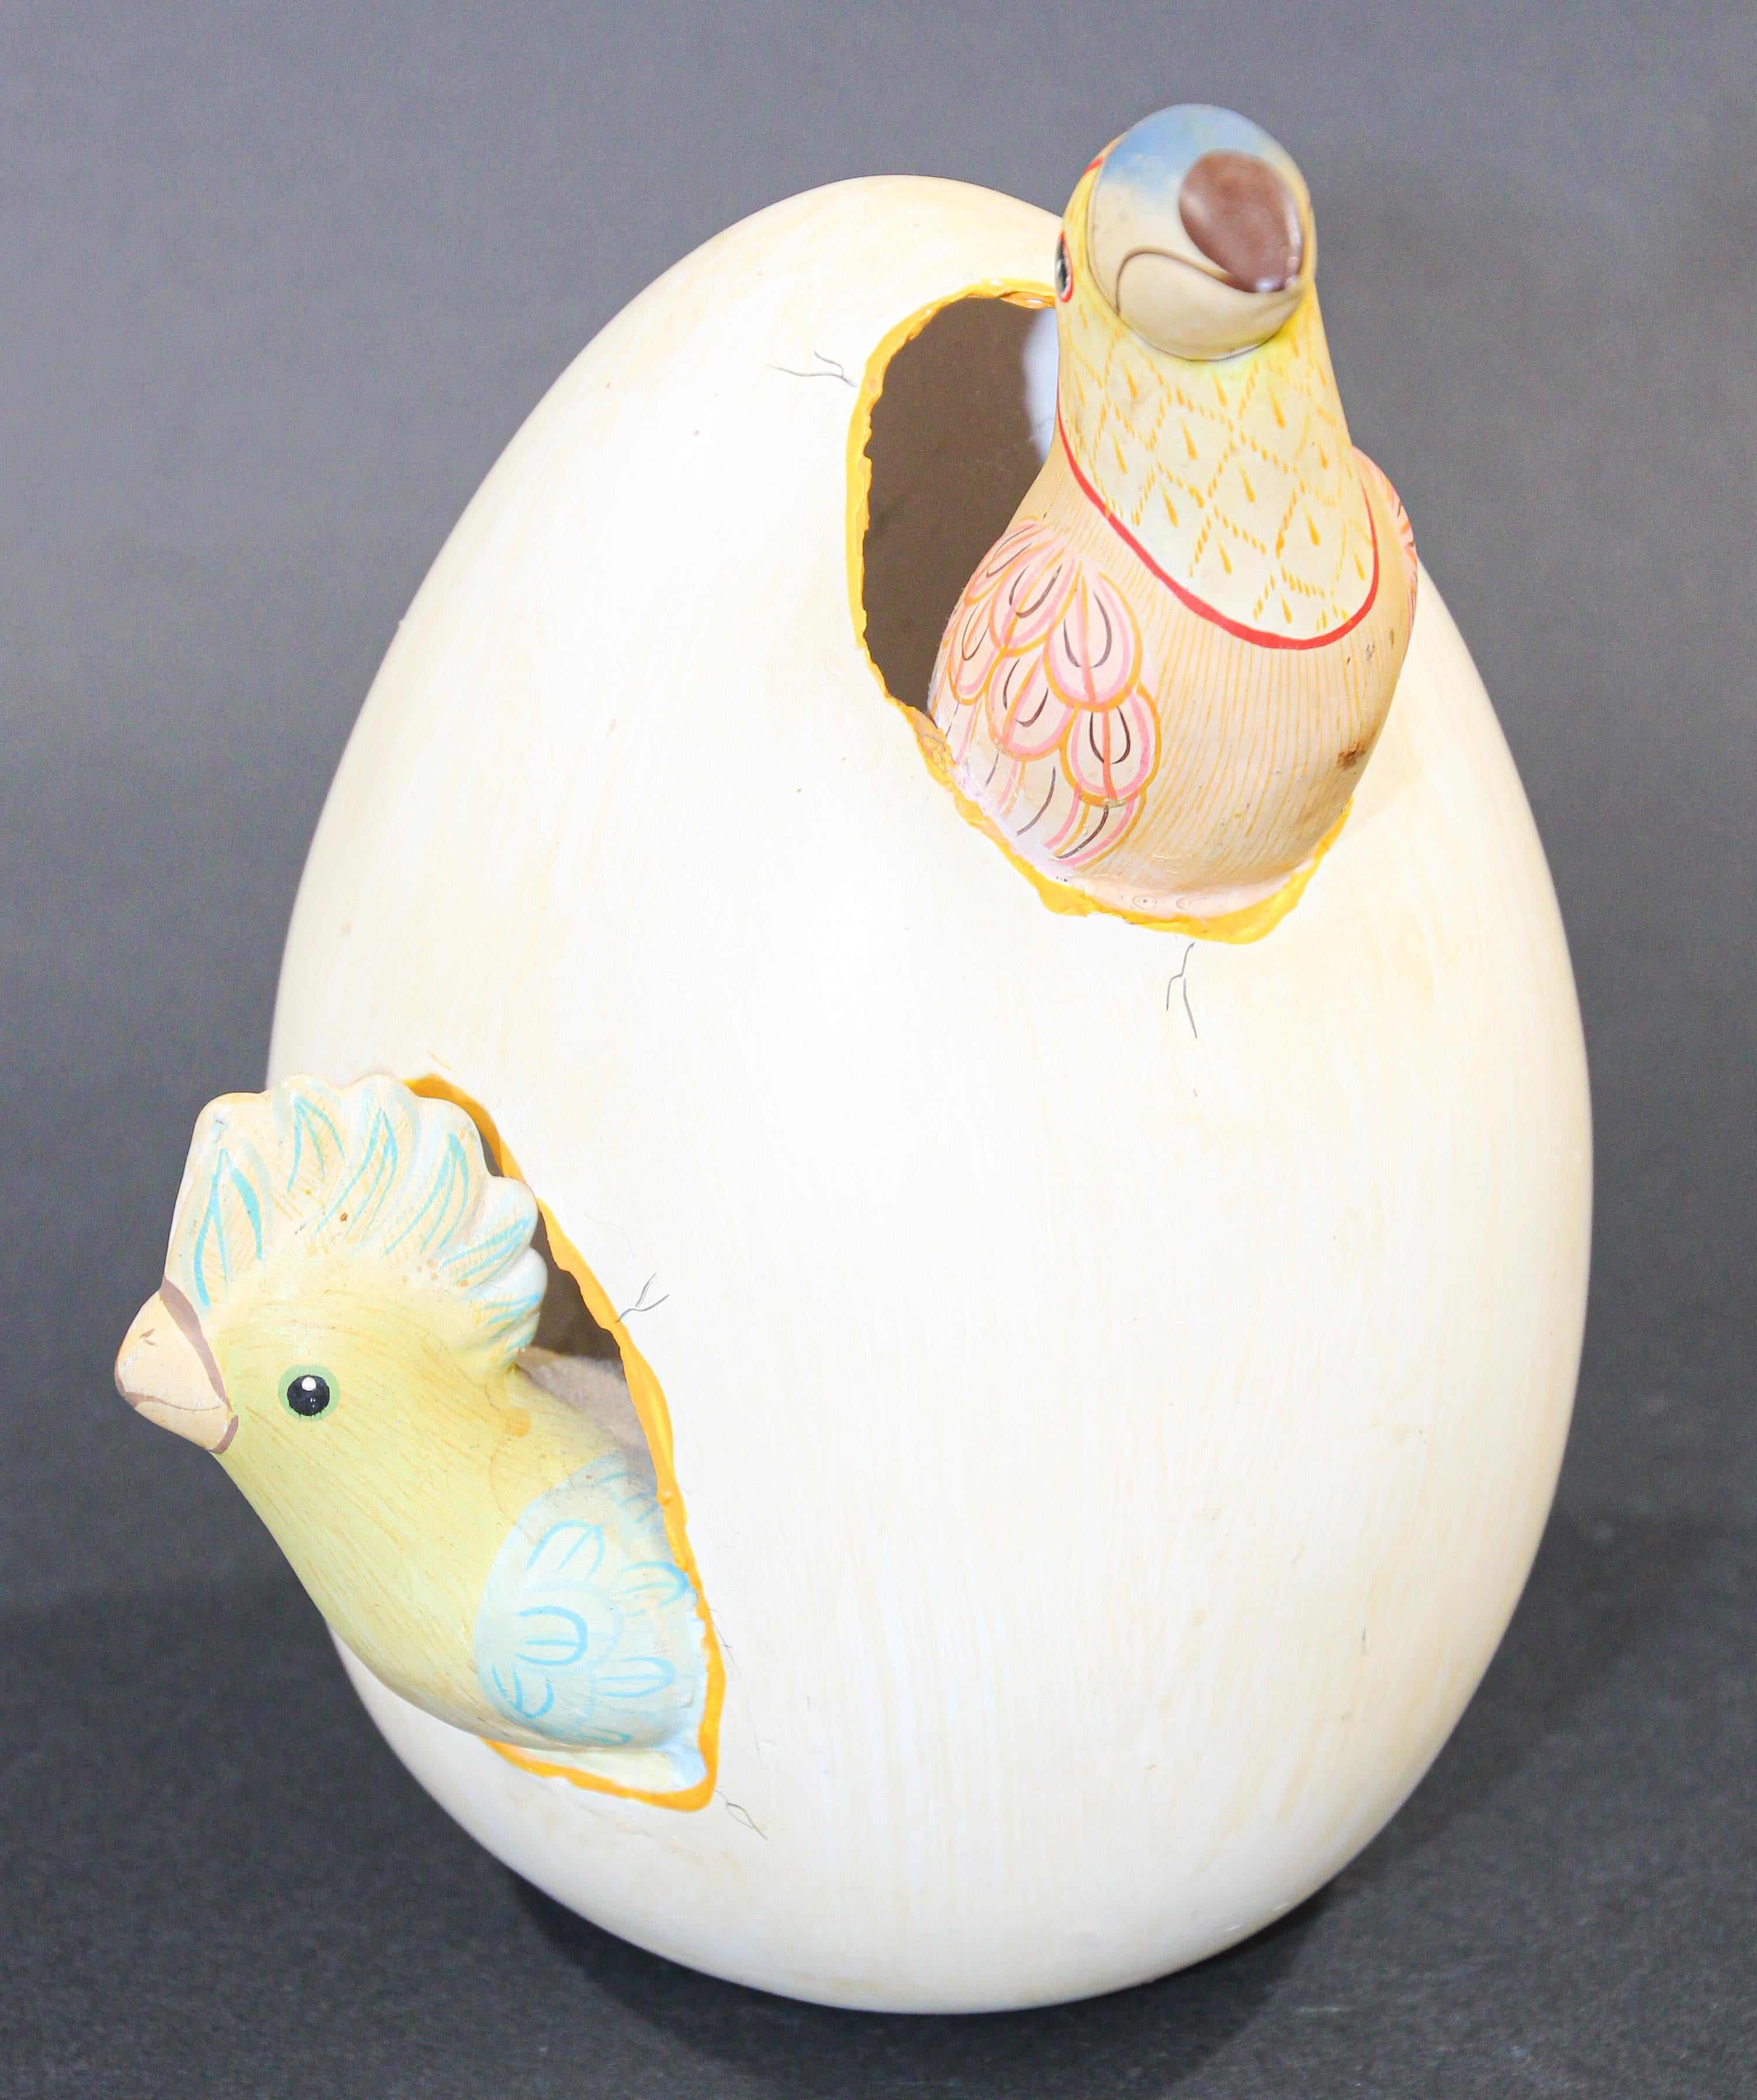 Large ceramic art sculpture toucans in egg hatching Signed by Artist.
Mexican Tonala Folk Art Hatching Egg with two Toucan Parrot Birds. 
Ceramic Sculpture Parrots, Toucans in Egg depicting 2 colorful toucan birds breaking free from an egg. Signed